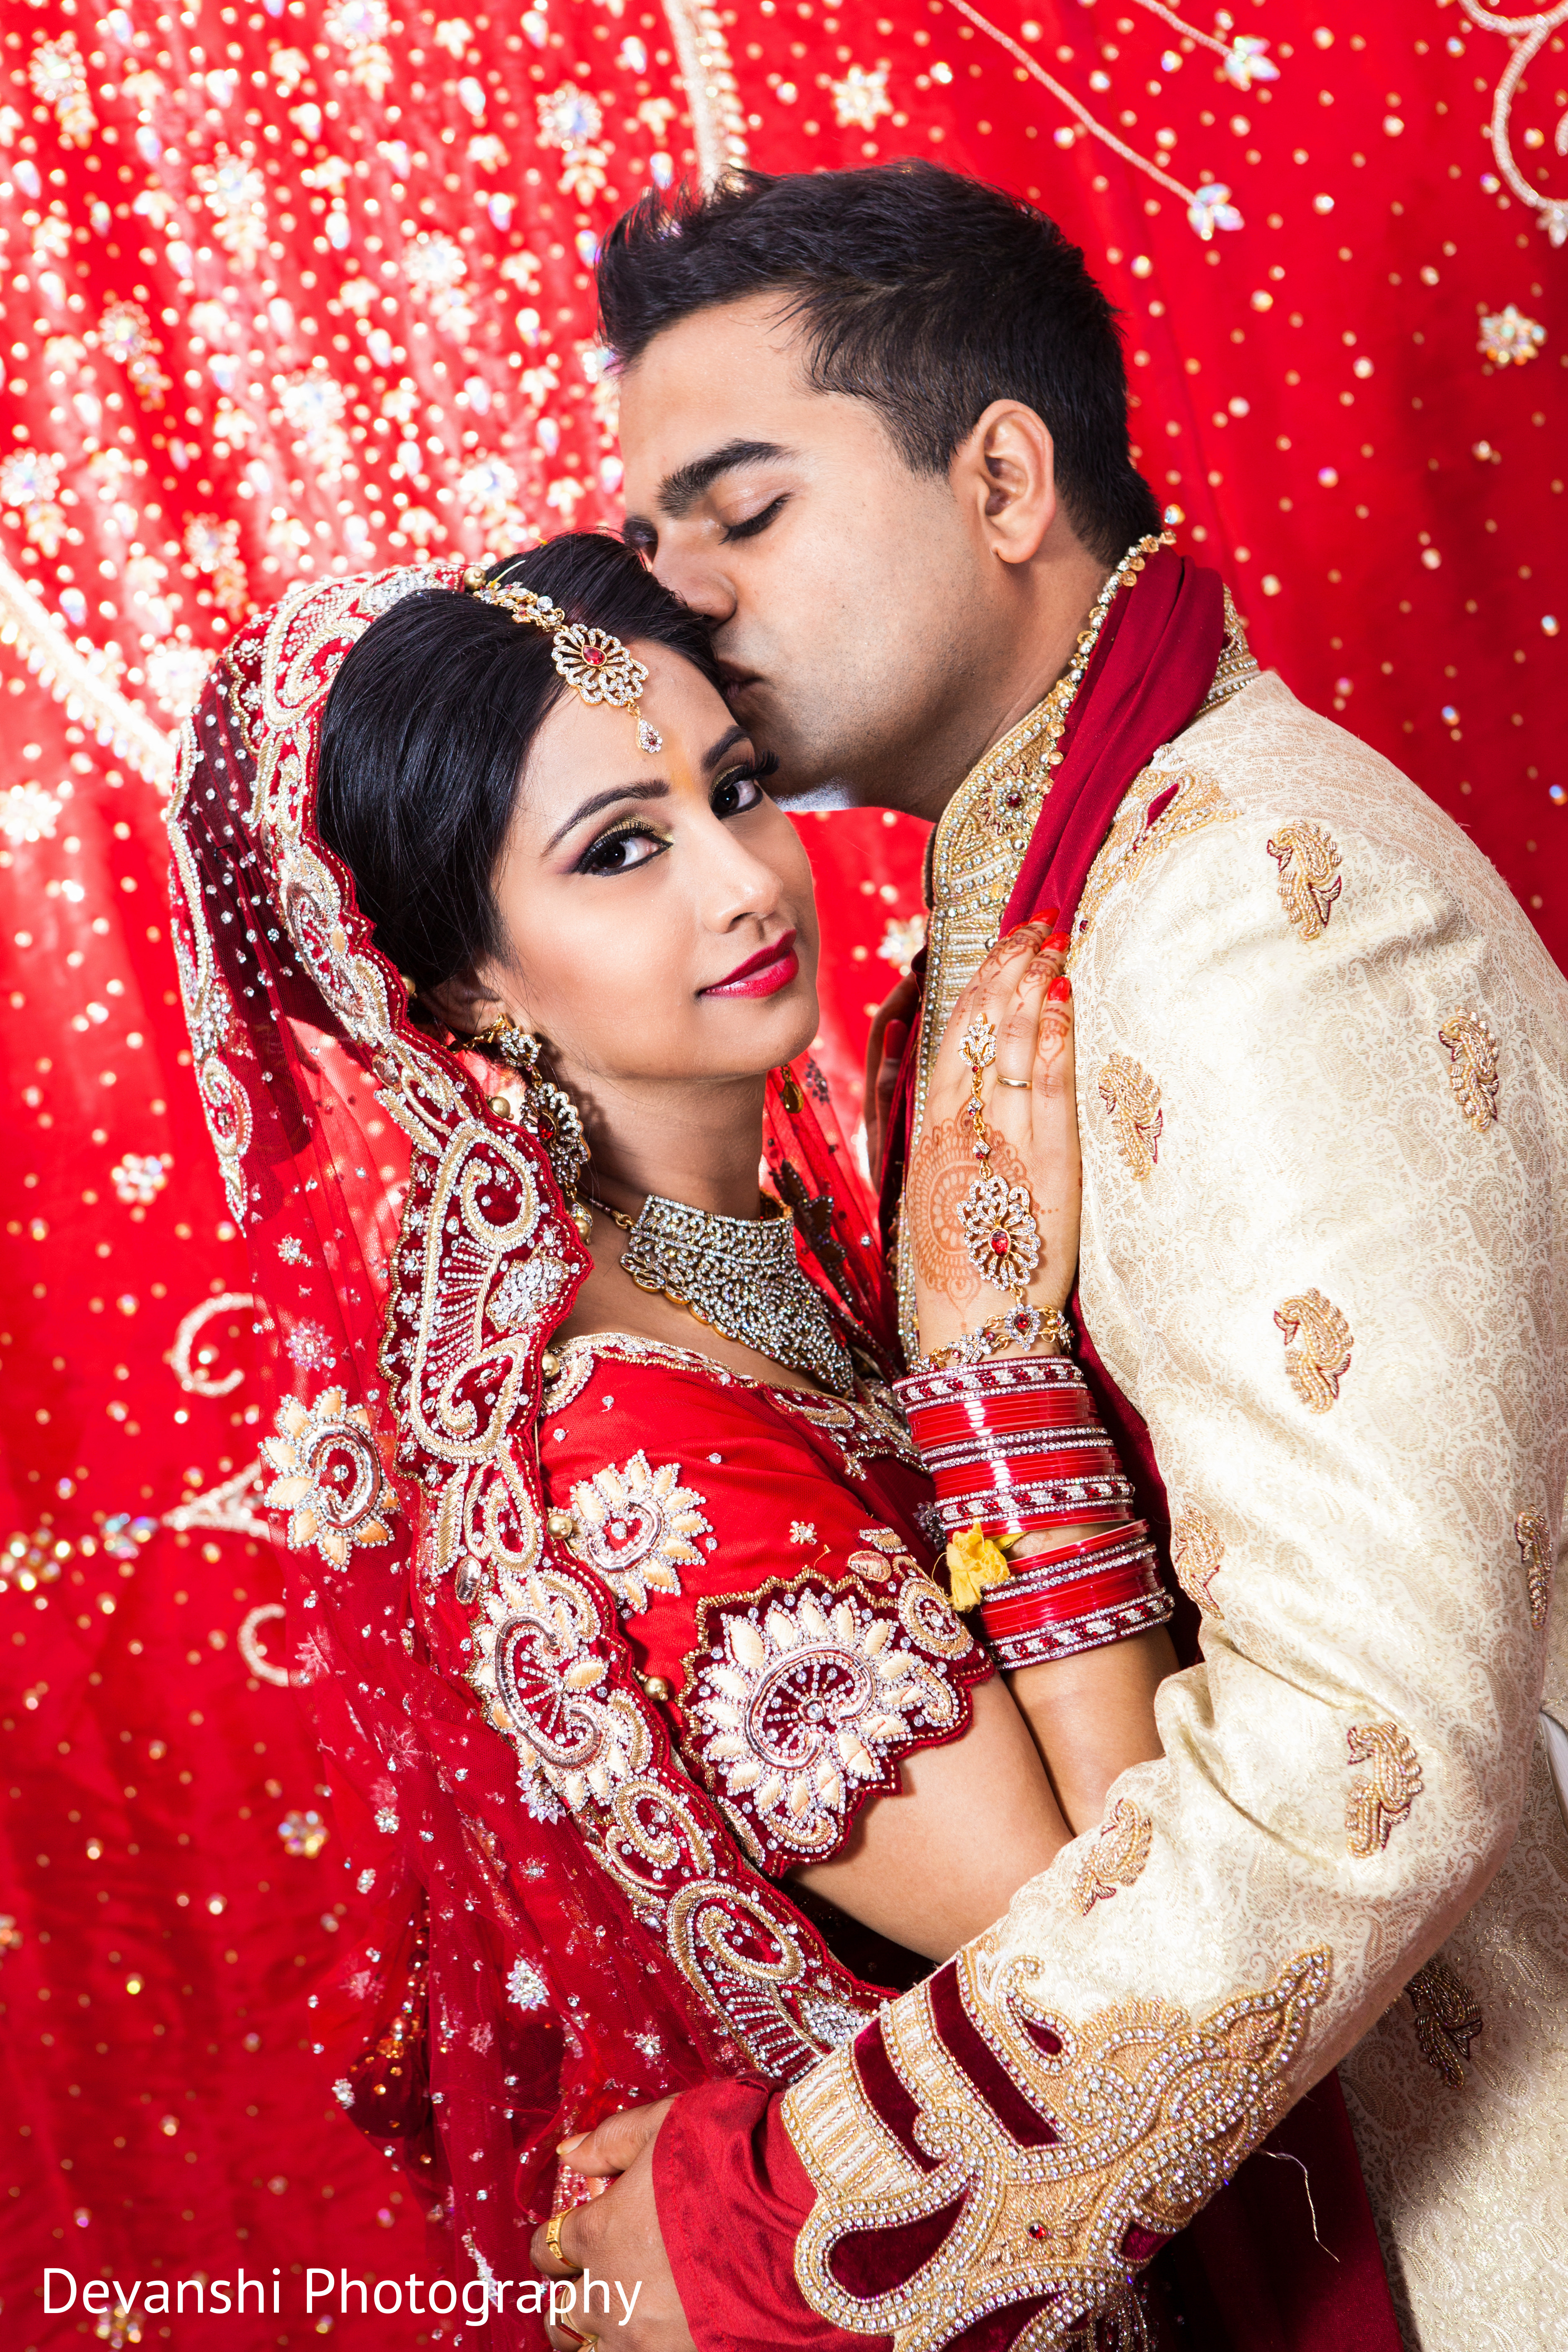 Pin by Fathima Rinosiya on Quick saves | Couple wedding dress, Couple  outfits, Marriage photos